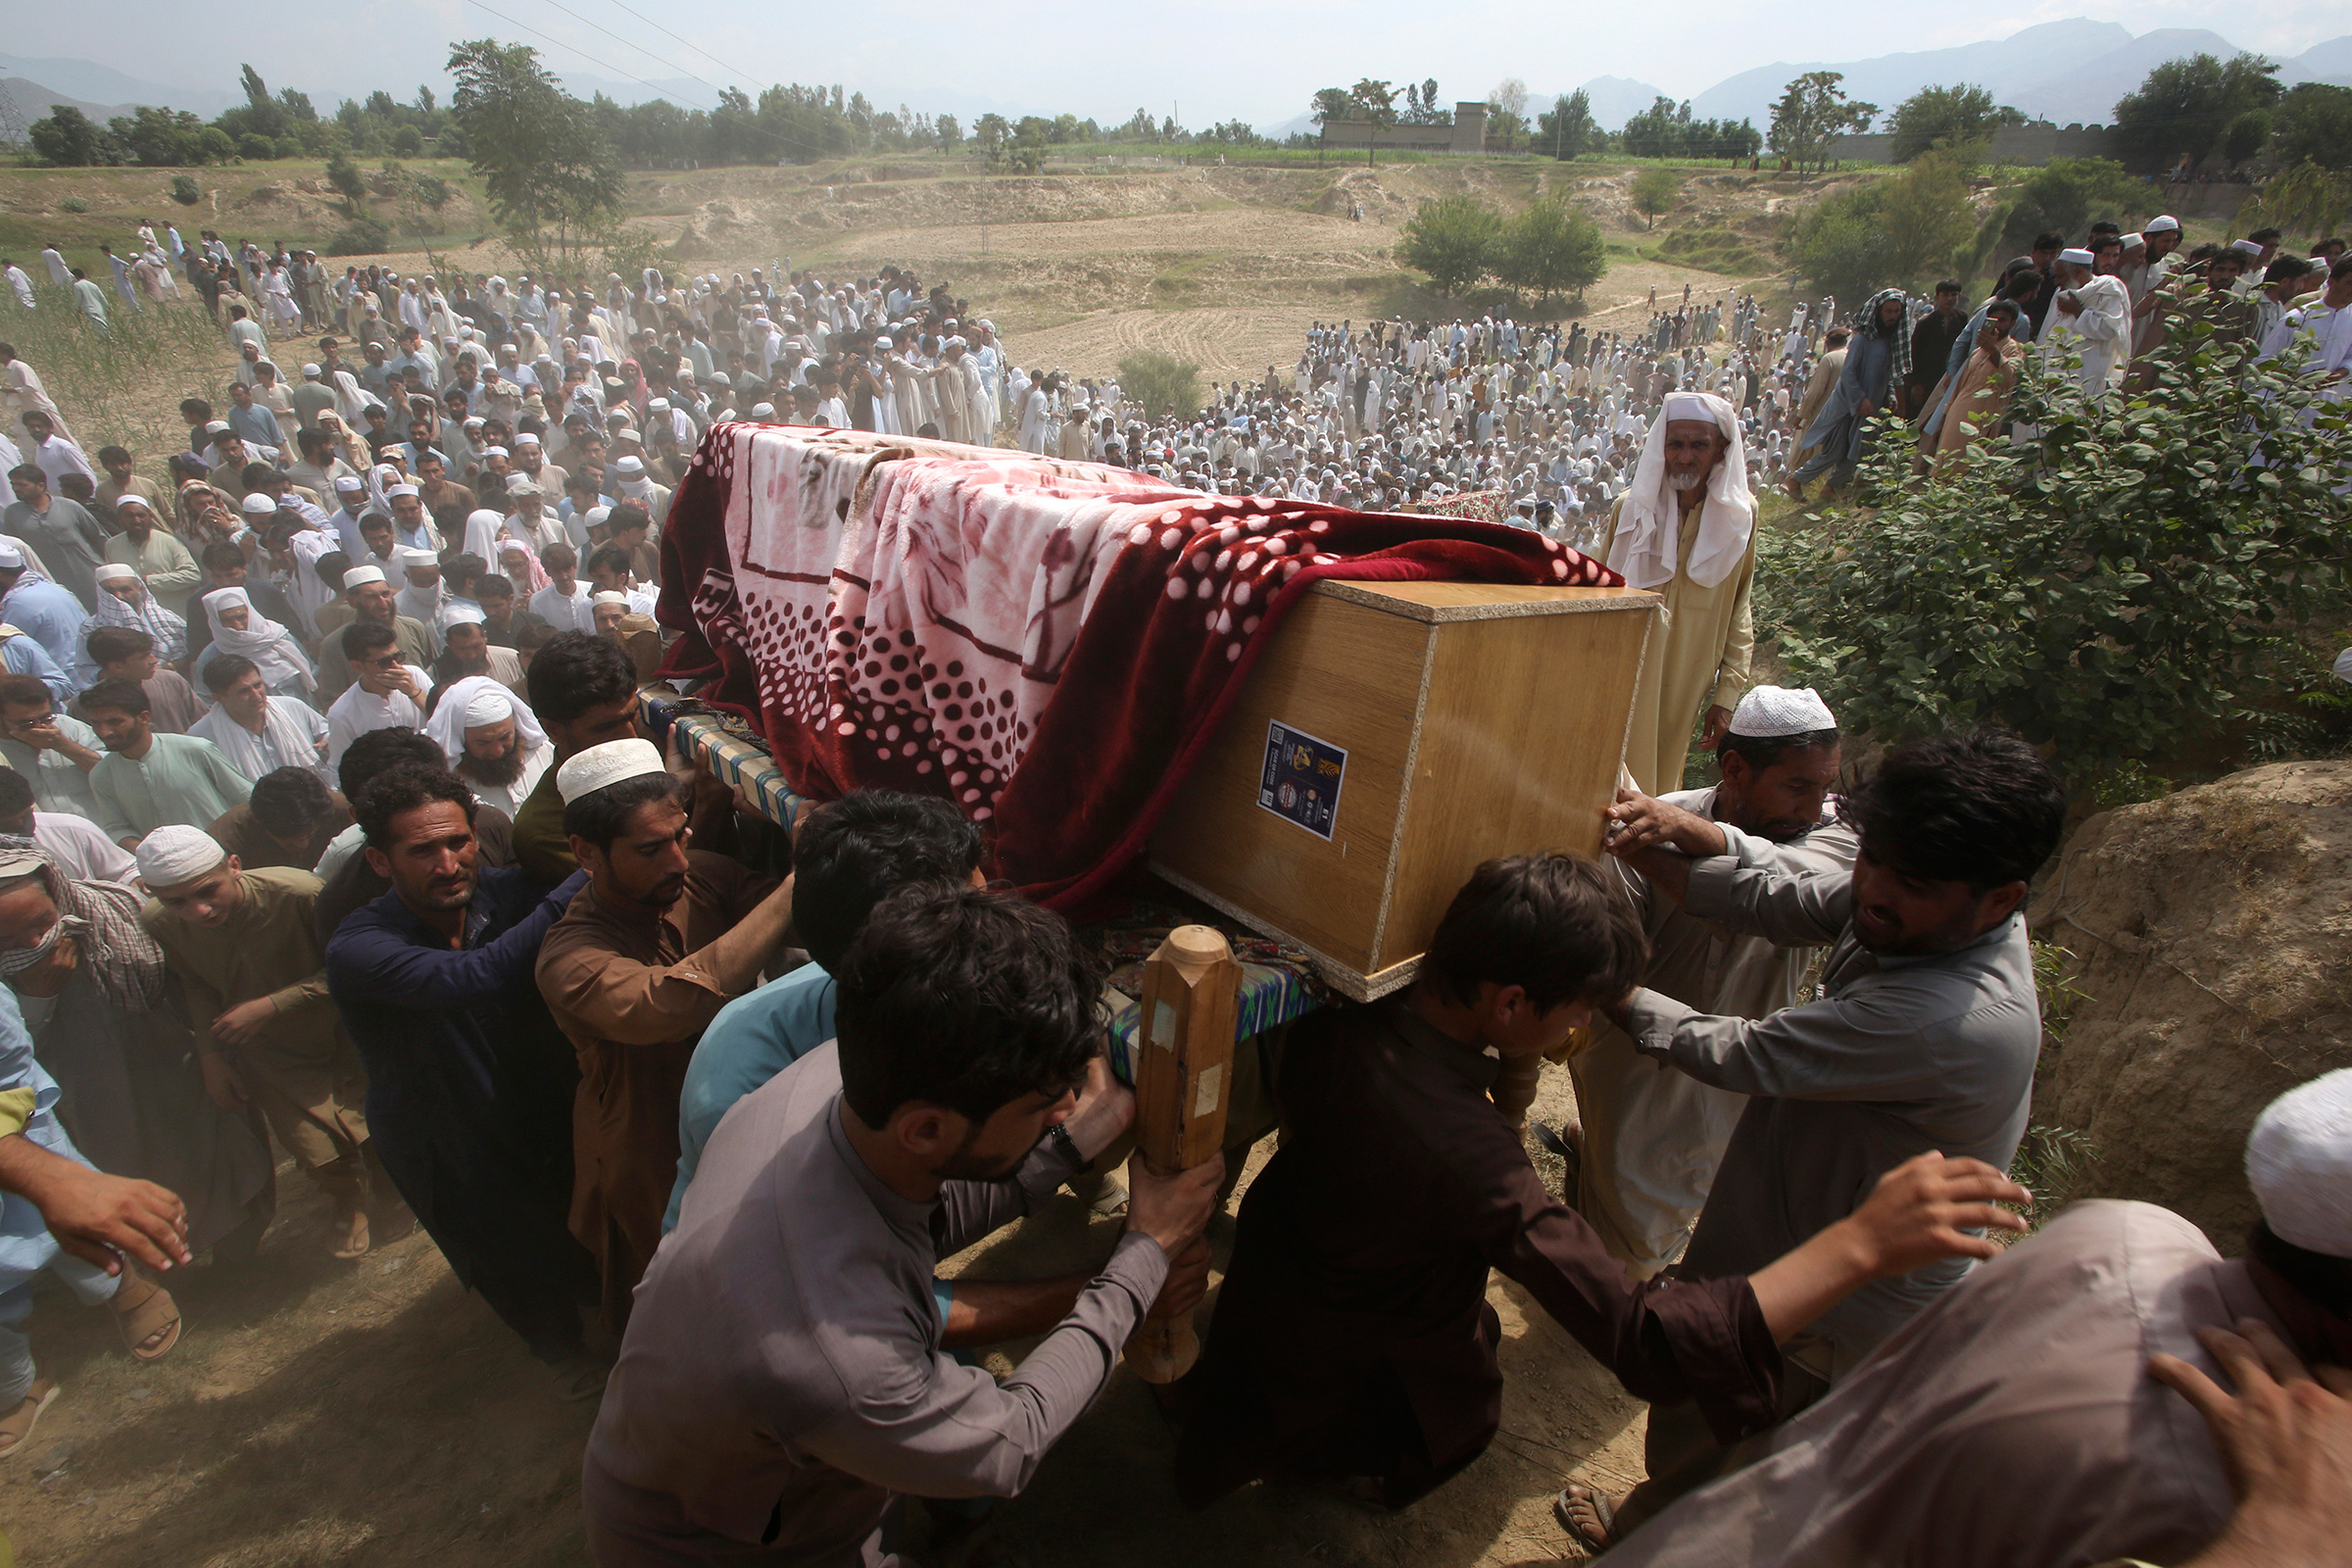 Relatives and mourners carry the casket of a victim killed in a suicide bomber attack in Bajaur district, Pakistan, on July 31.  (Mohammad Sajjad—AP)